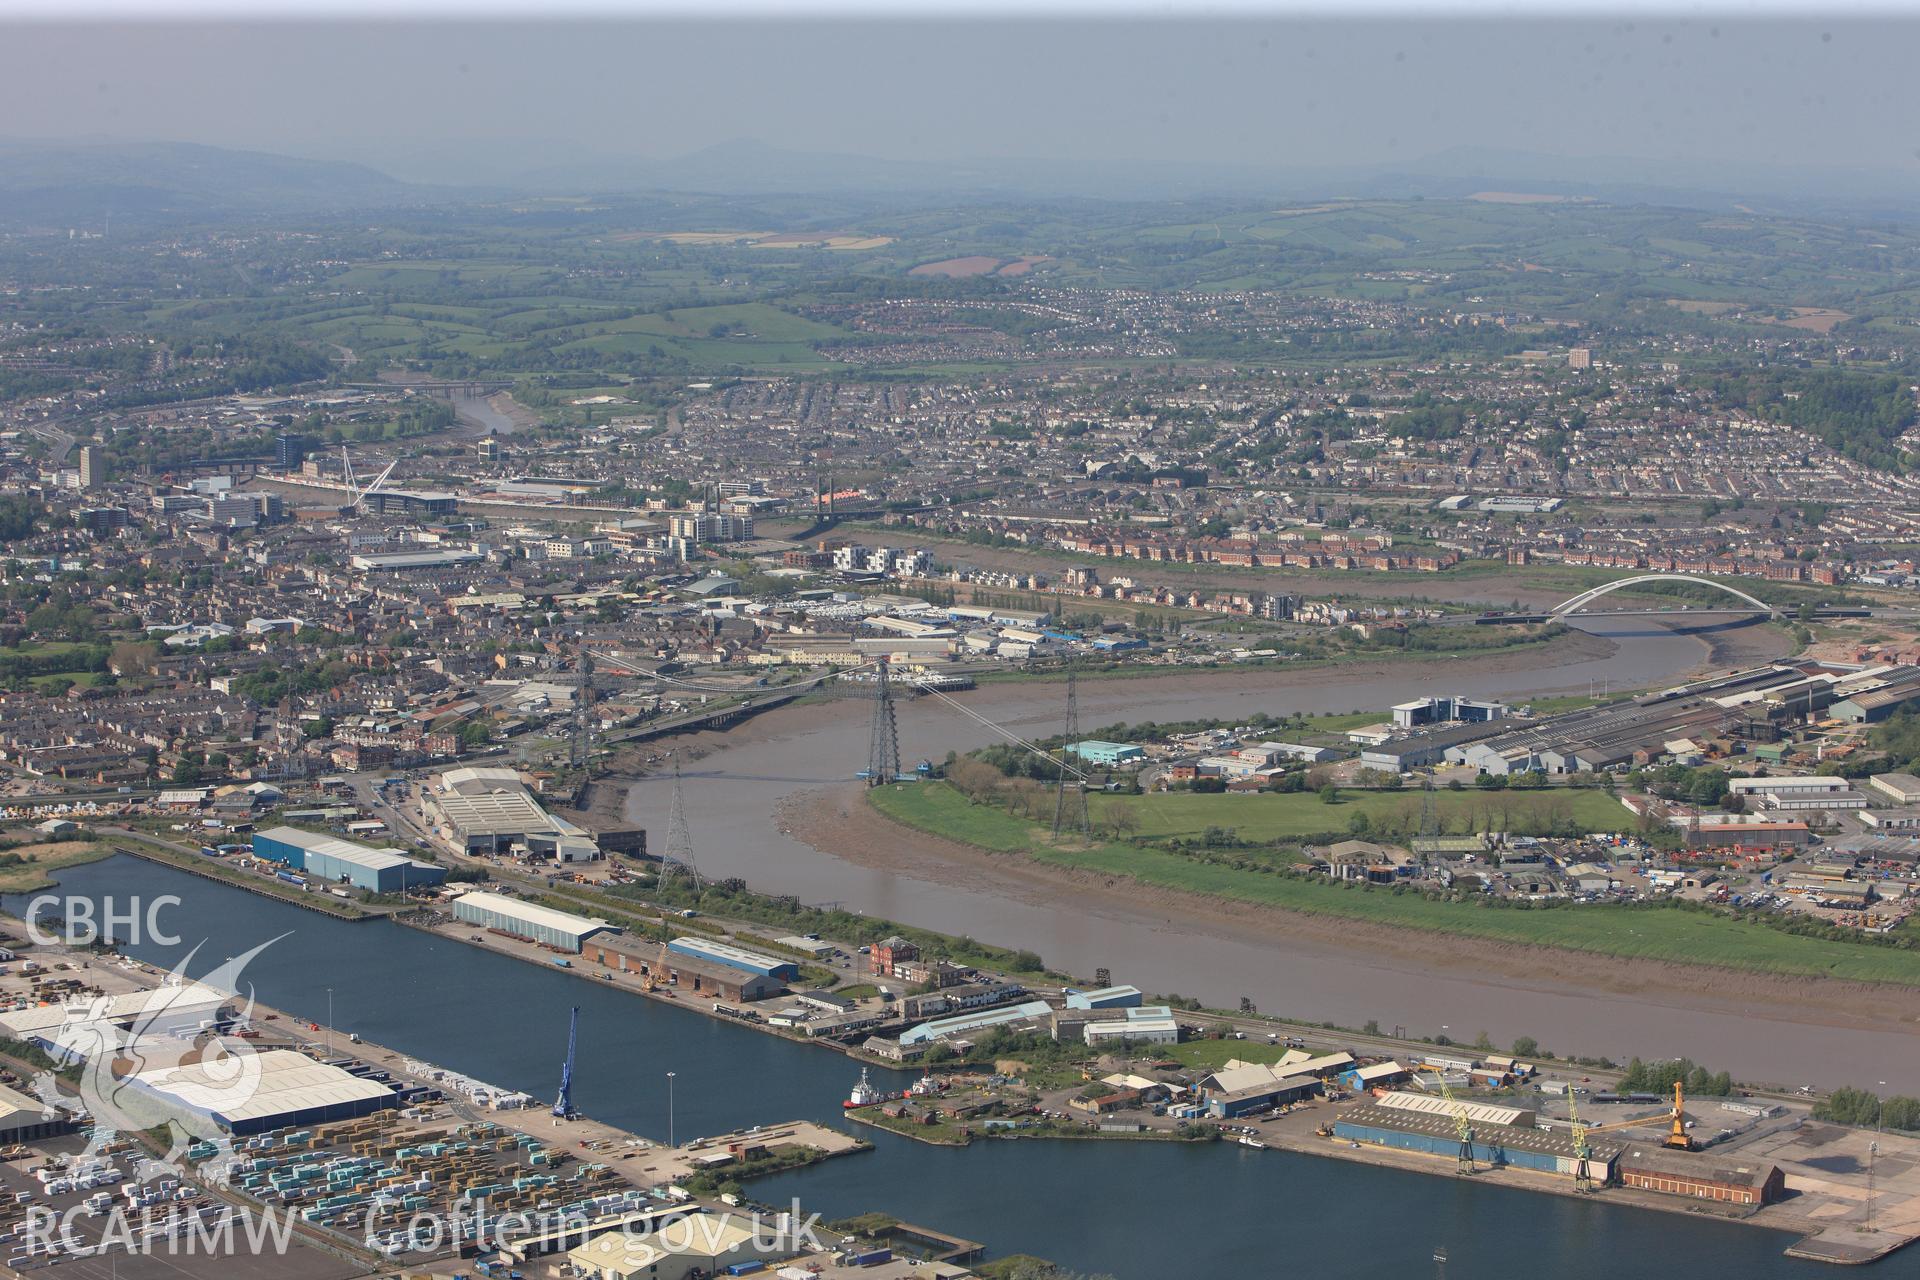 RCAHMW colour oblique photograph of Newport Docks. Taken by Toby Driver on 22/05/2012.